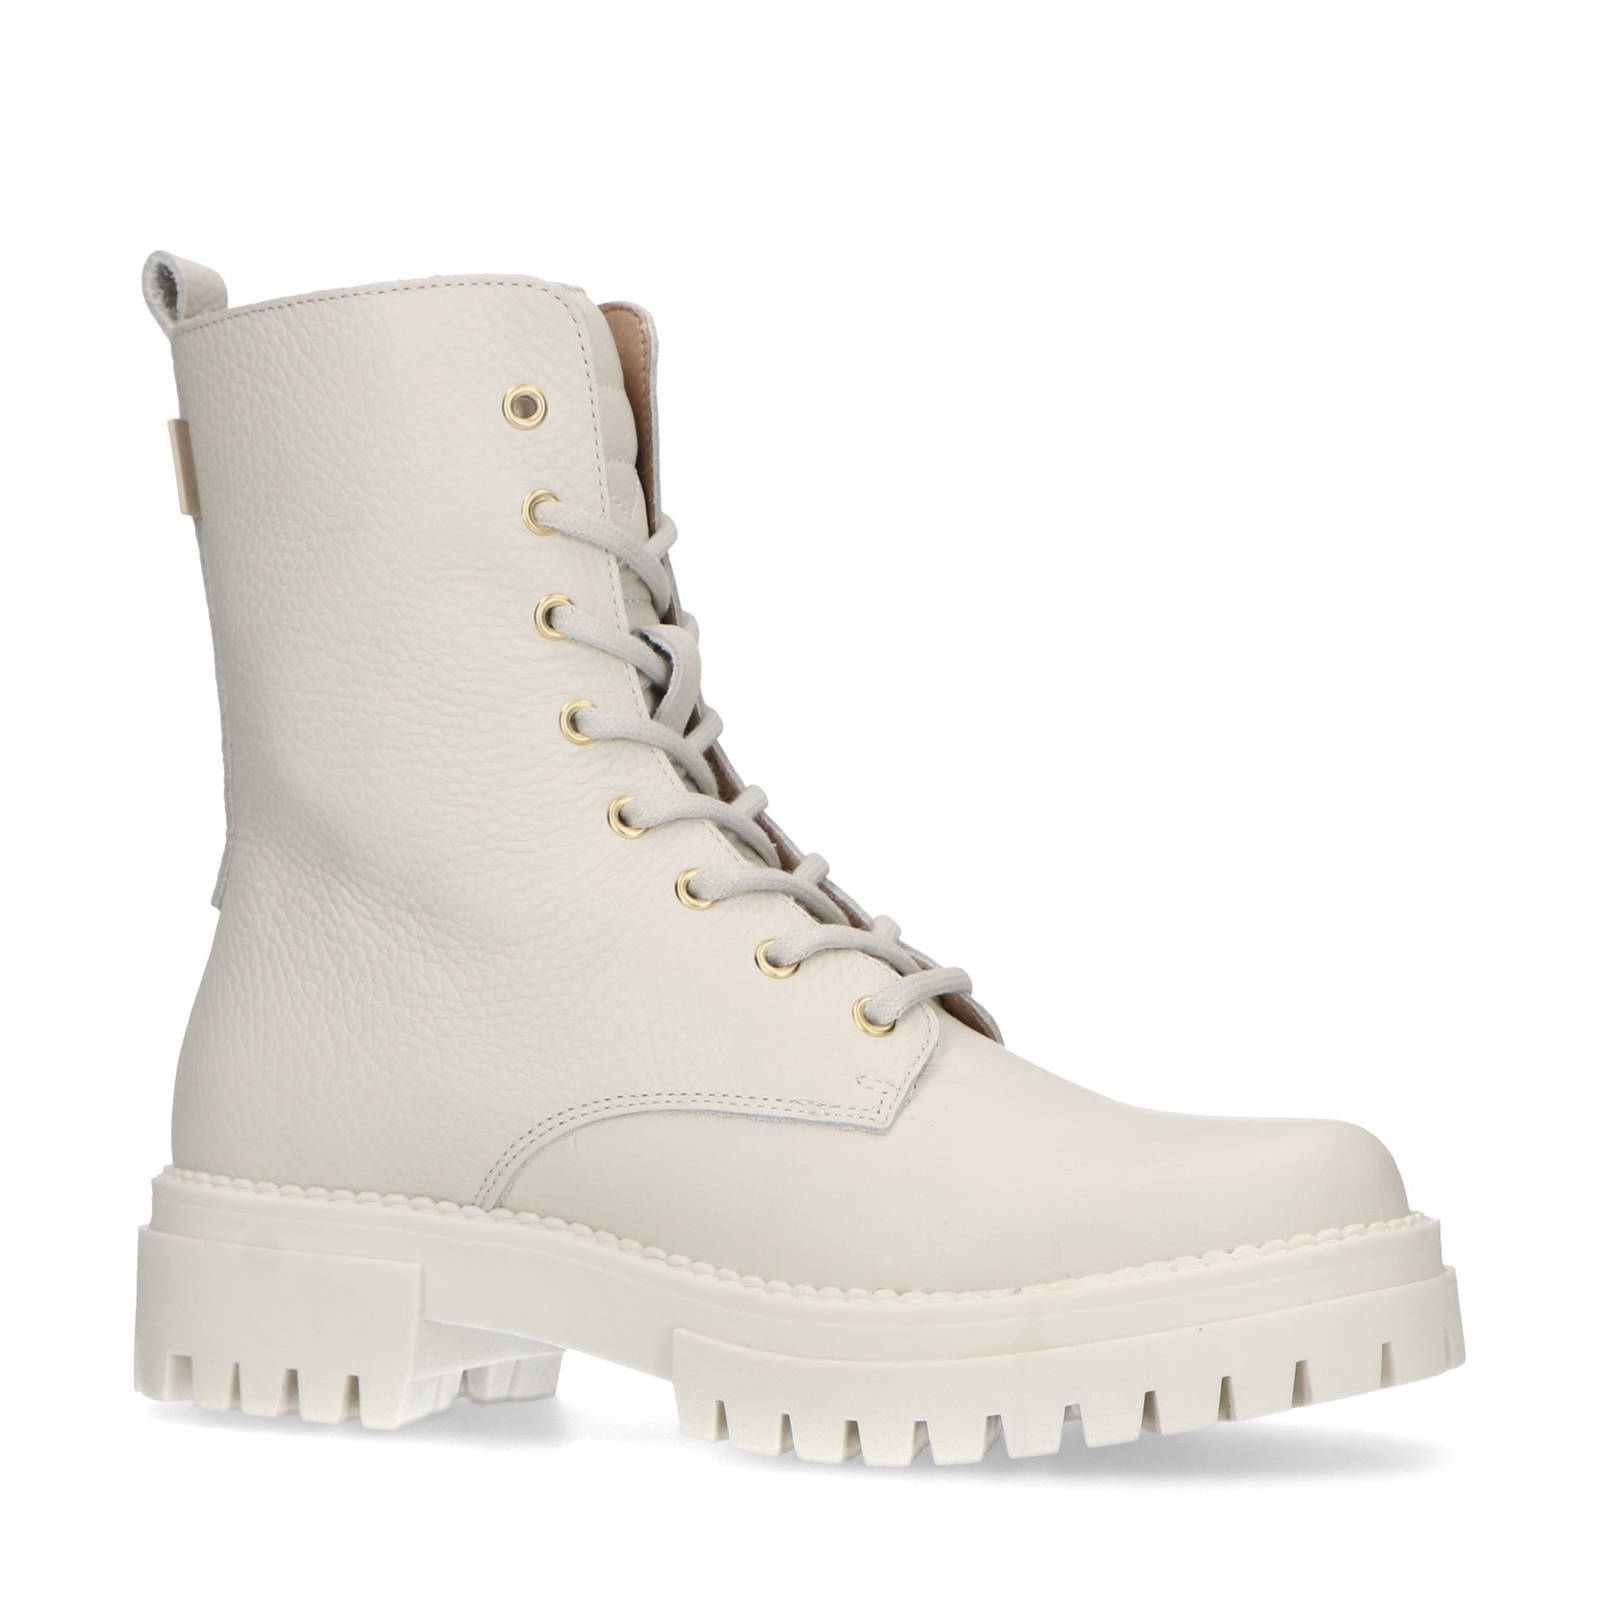 Free shipping service Free Shipping and Returns and stylish Manfield leren veterboots off white Manfield Enkellaarsjes met veters